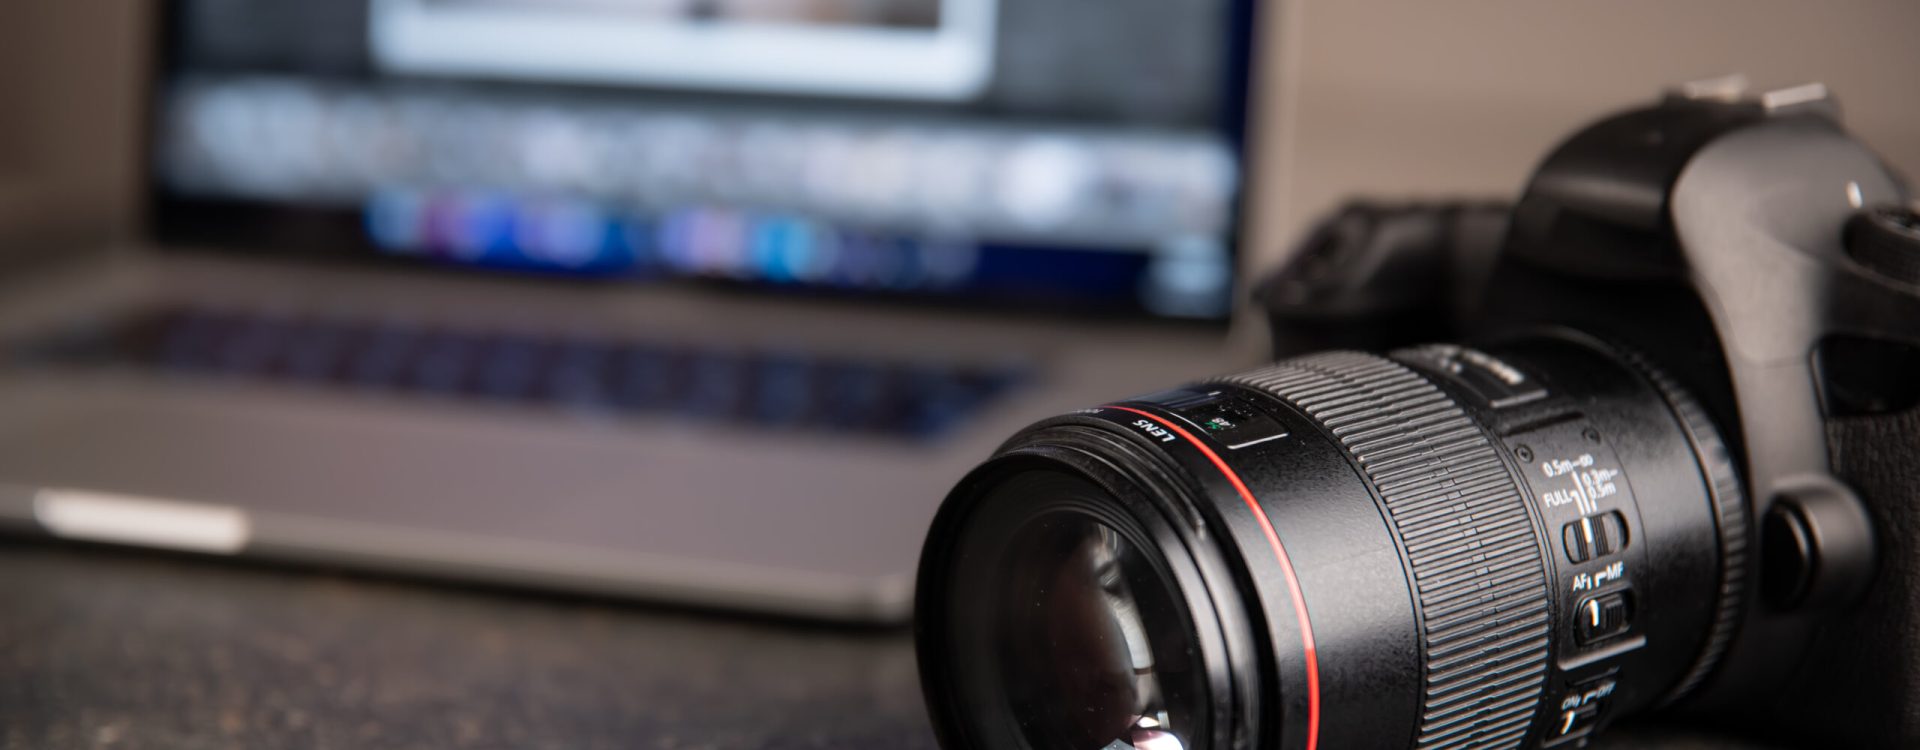 Professional camera on a blurred background with a laptop. The concept of working with photos and videos.